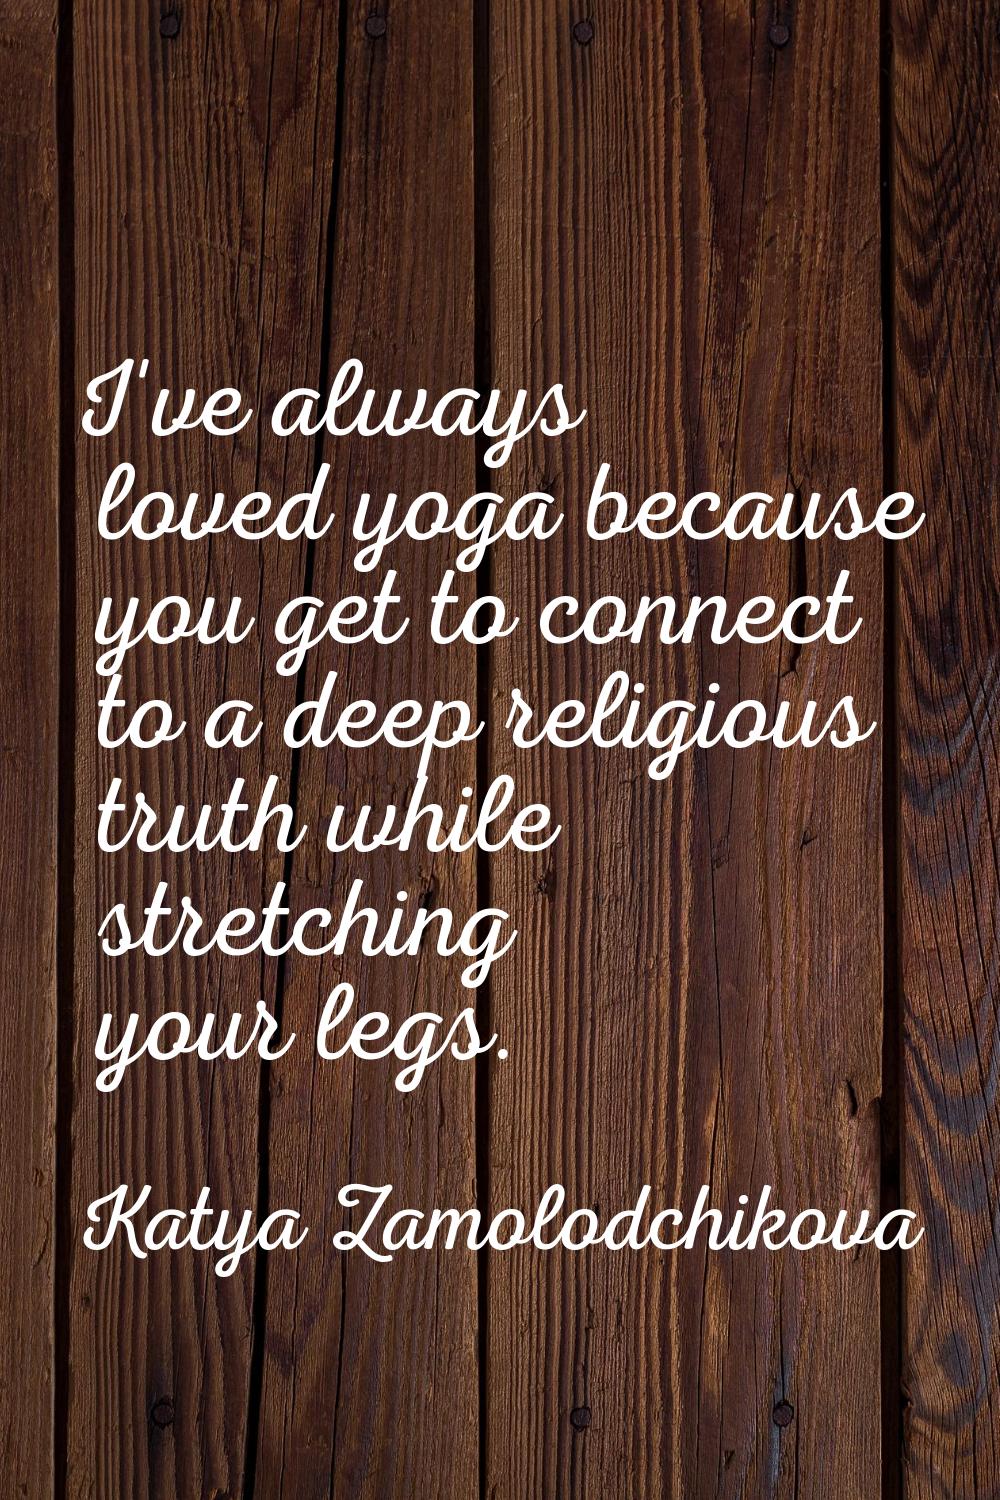 I've always loved yoga because you get to connect to a deep religious truth while stretching your l